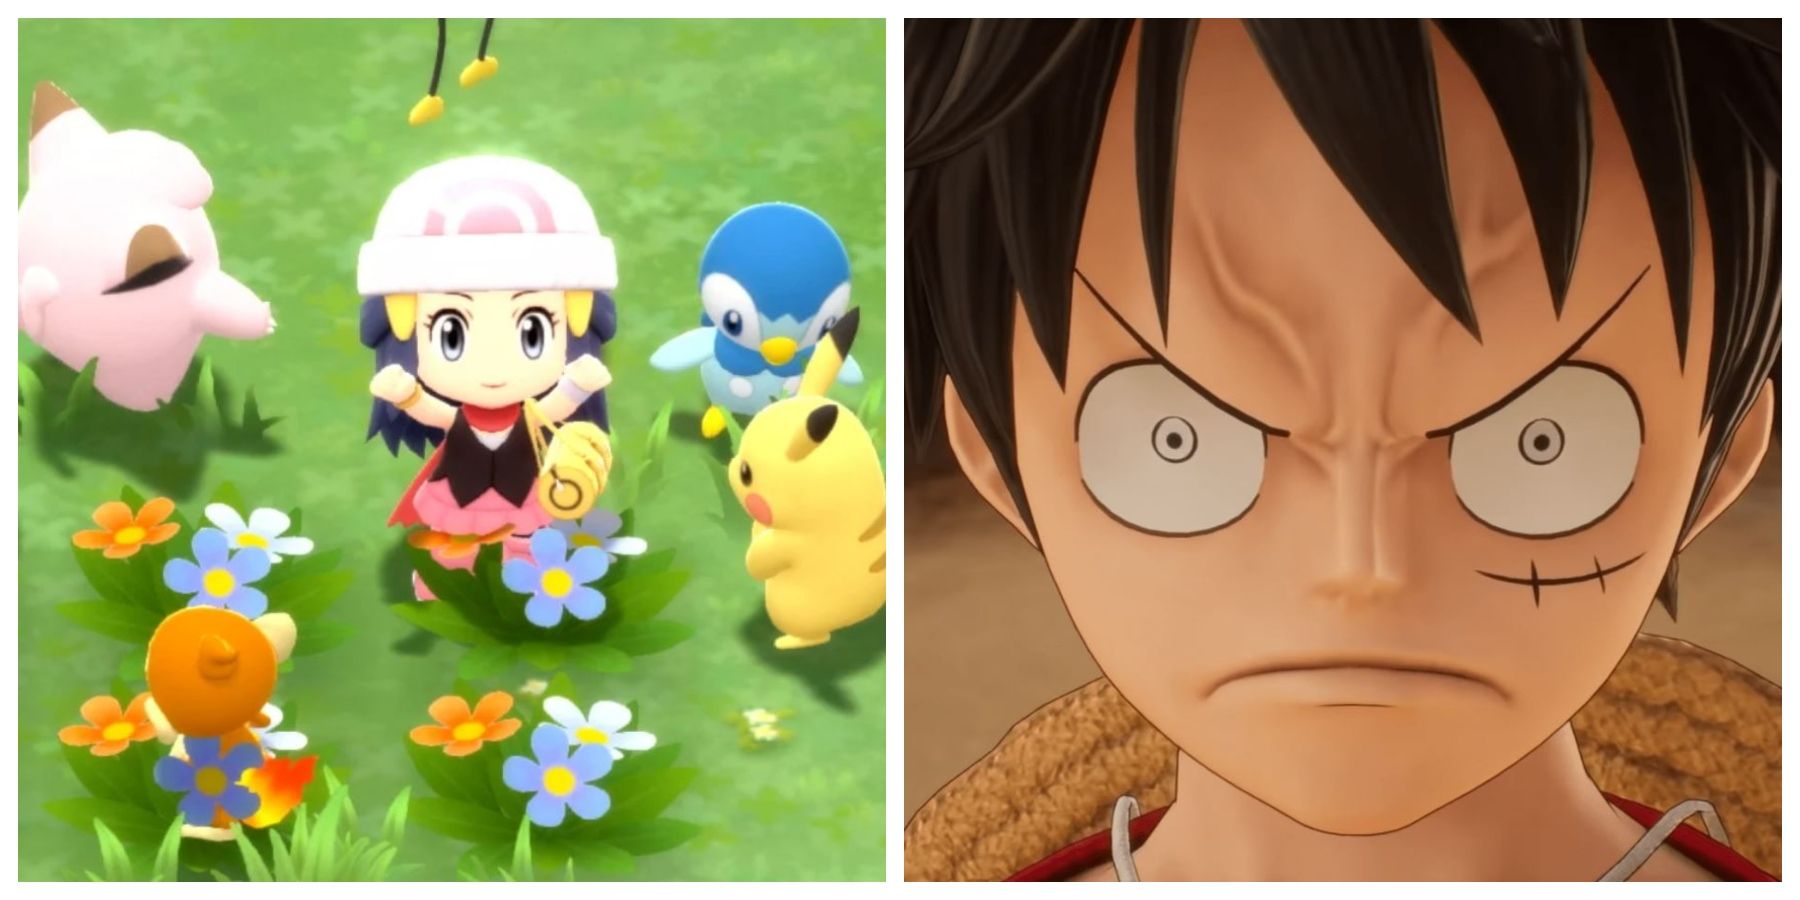 Pokémon BDSP Shows How Bad A One Piece JRPG Could Be - One Piece Odyssey and Pokémon Brilliant Diamond Shining Pearl